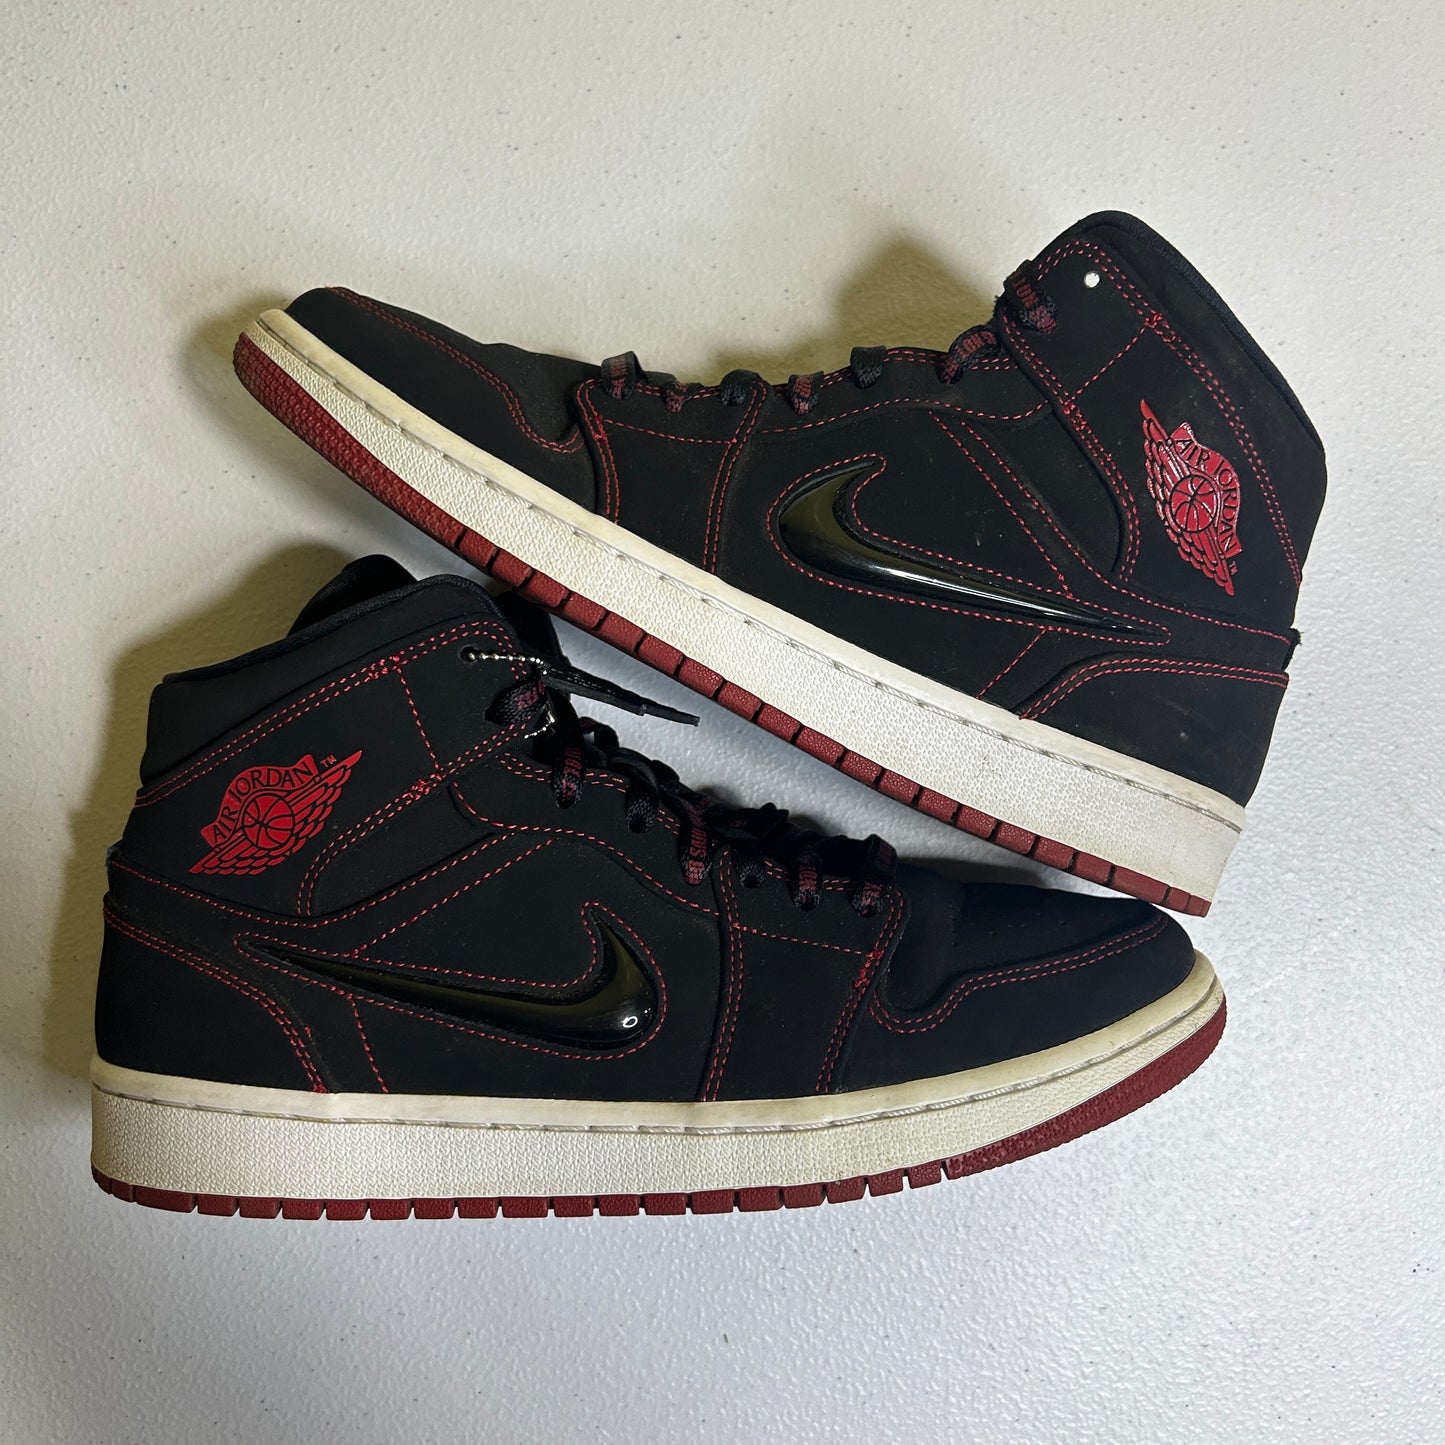 Jordan 1 Mid Fearless Come Fly With Me (Pre-Owned)